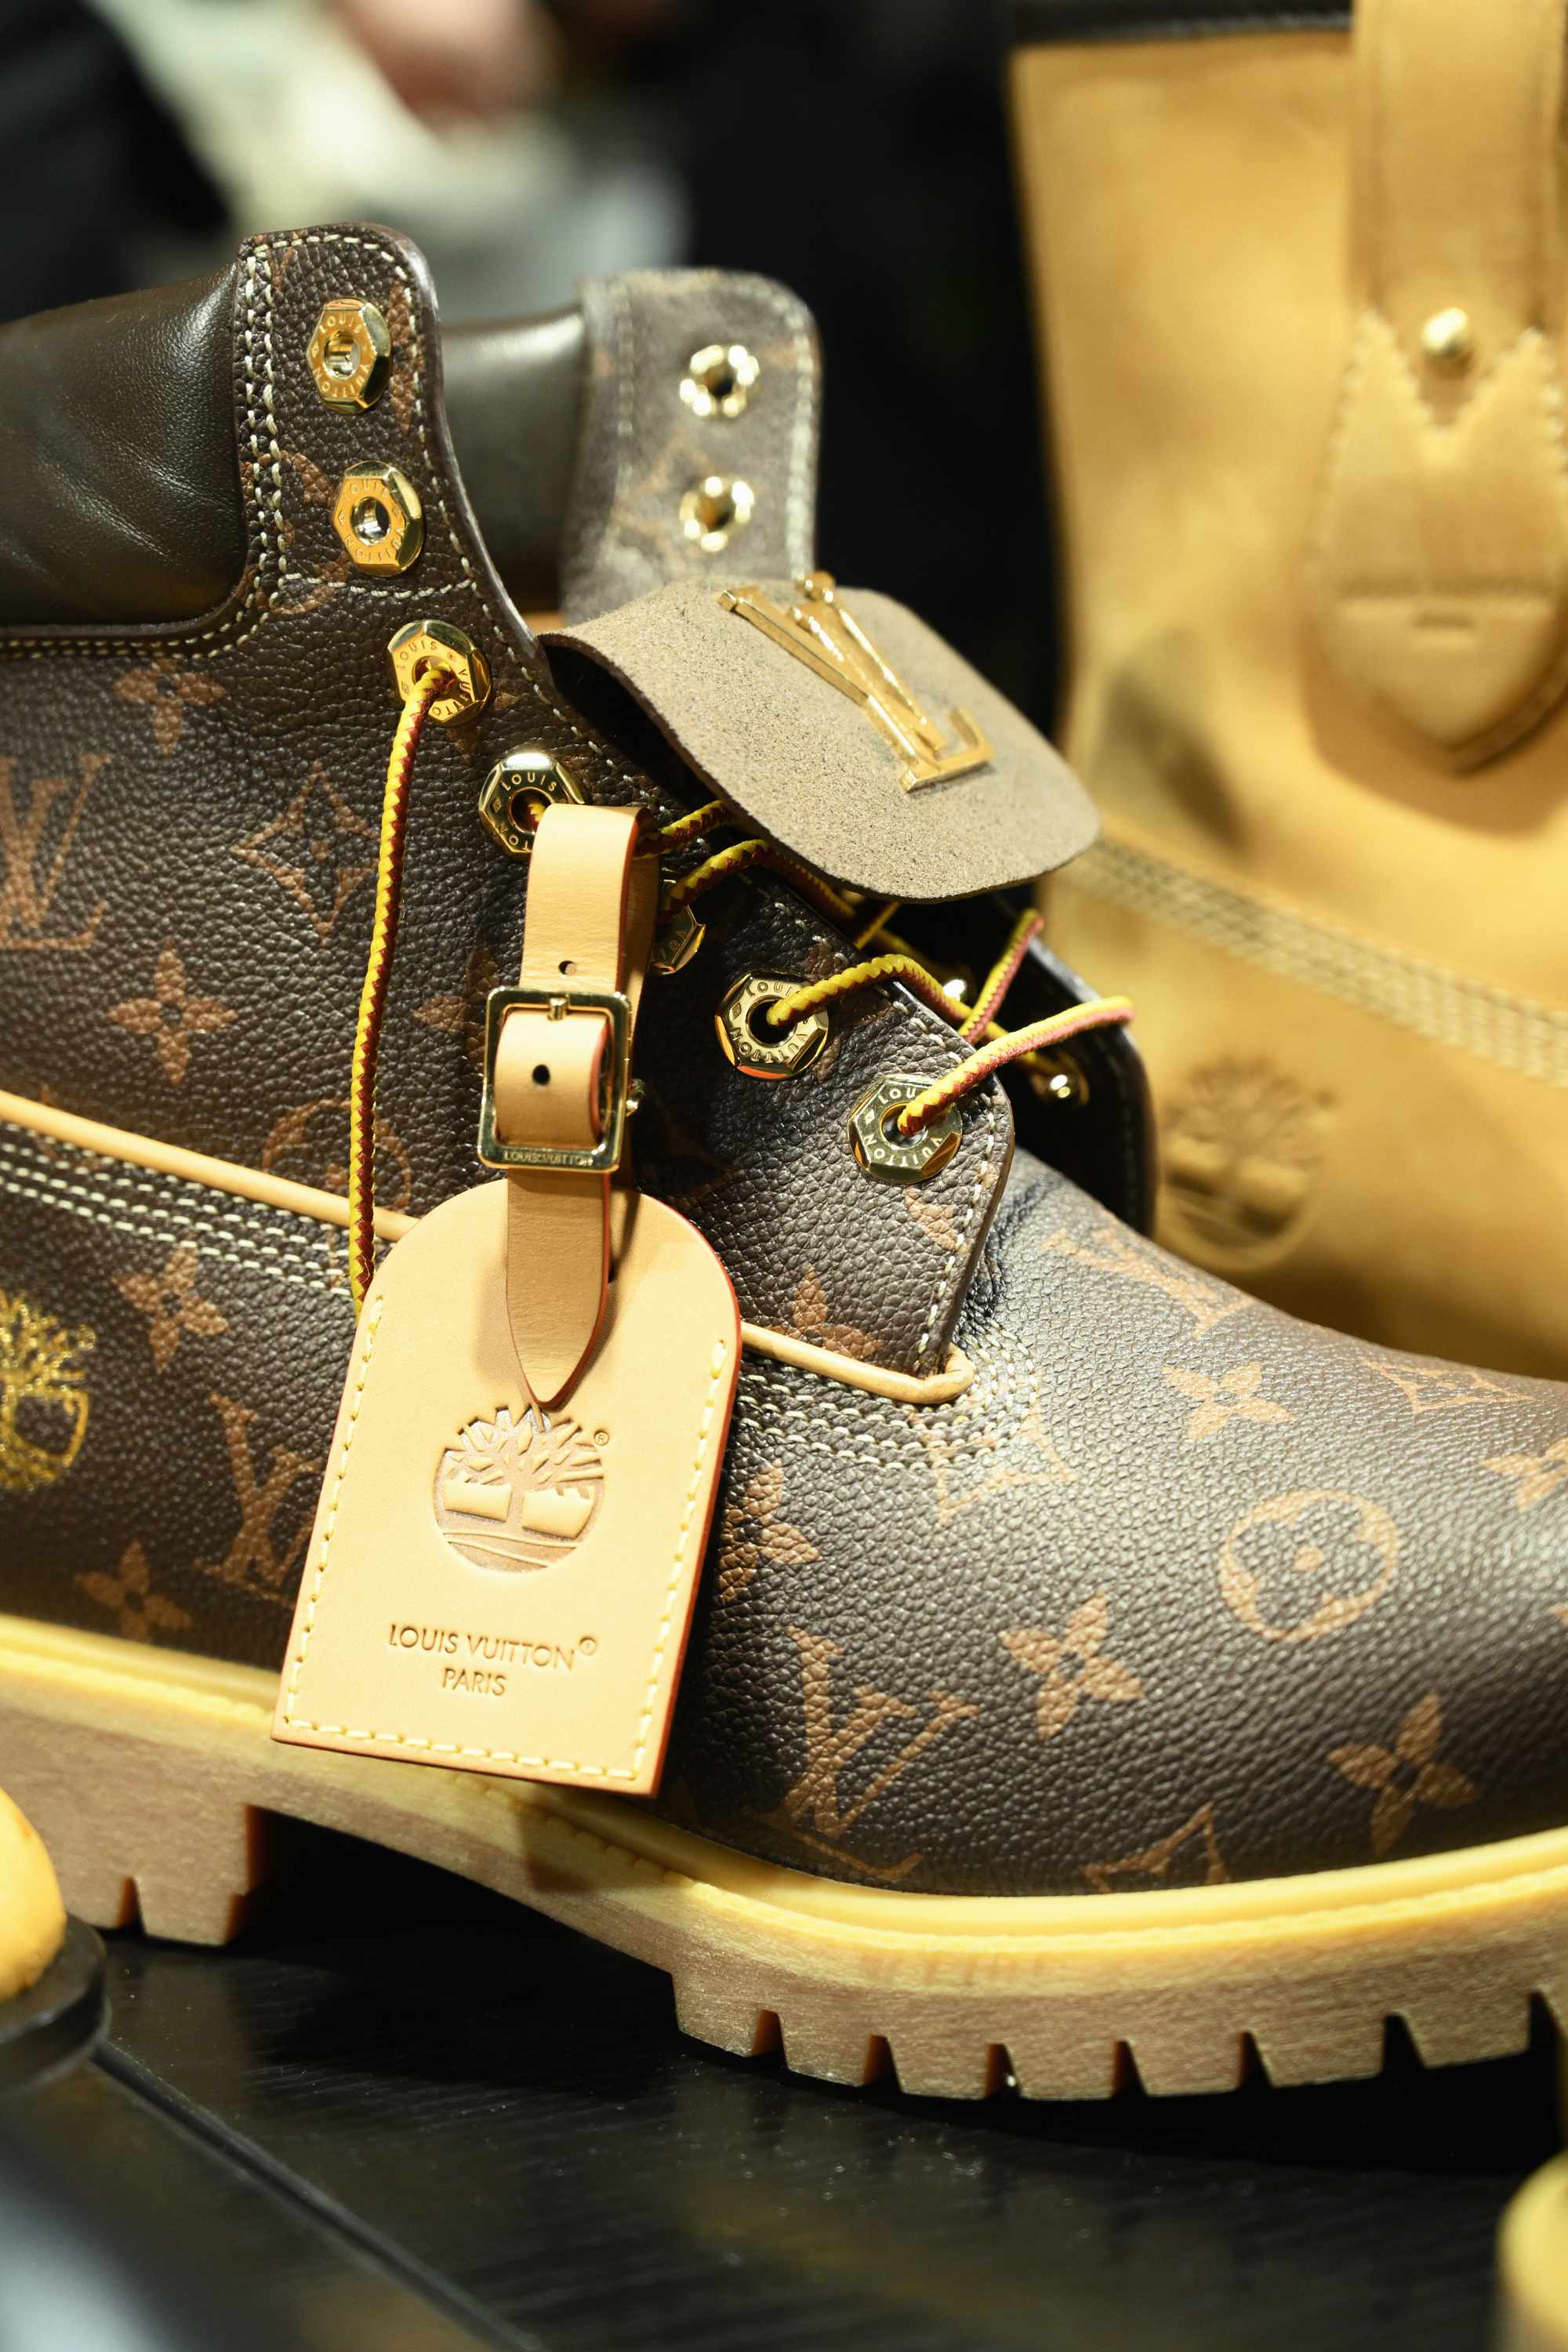 Louis Vuitton's Timberland boot collab revealed by Pharrell Williams, including beige and black 6" leather boots and ranger-style pull ons in Louis Vuitton-monogrammed boxes